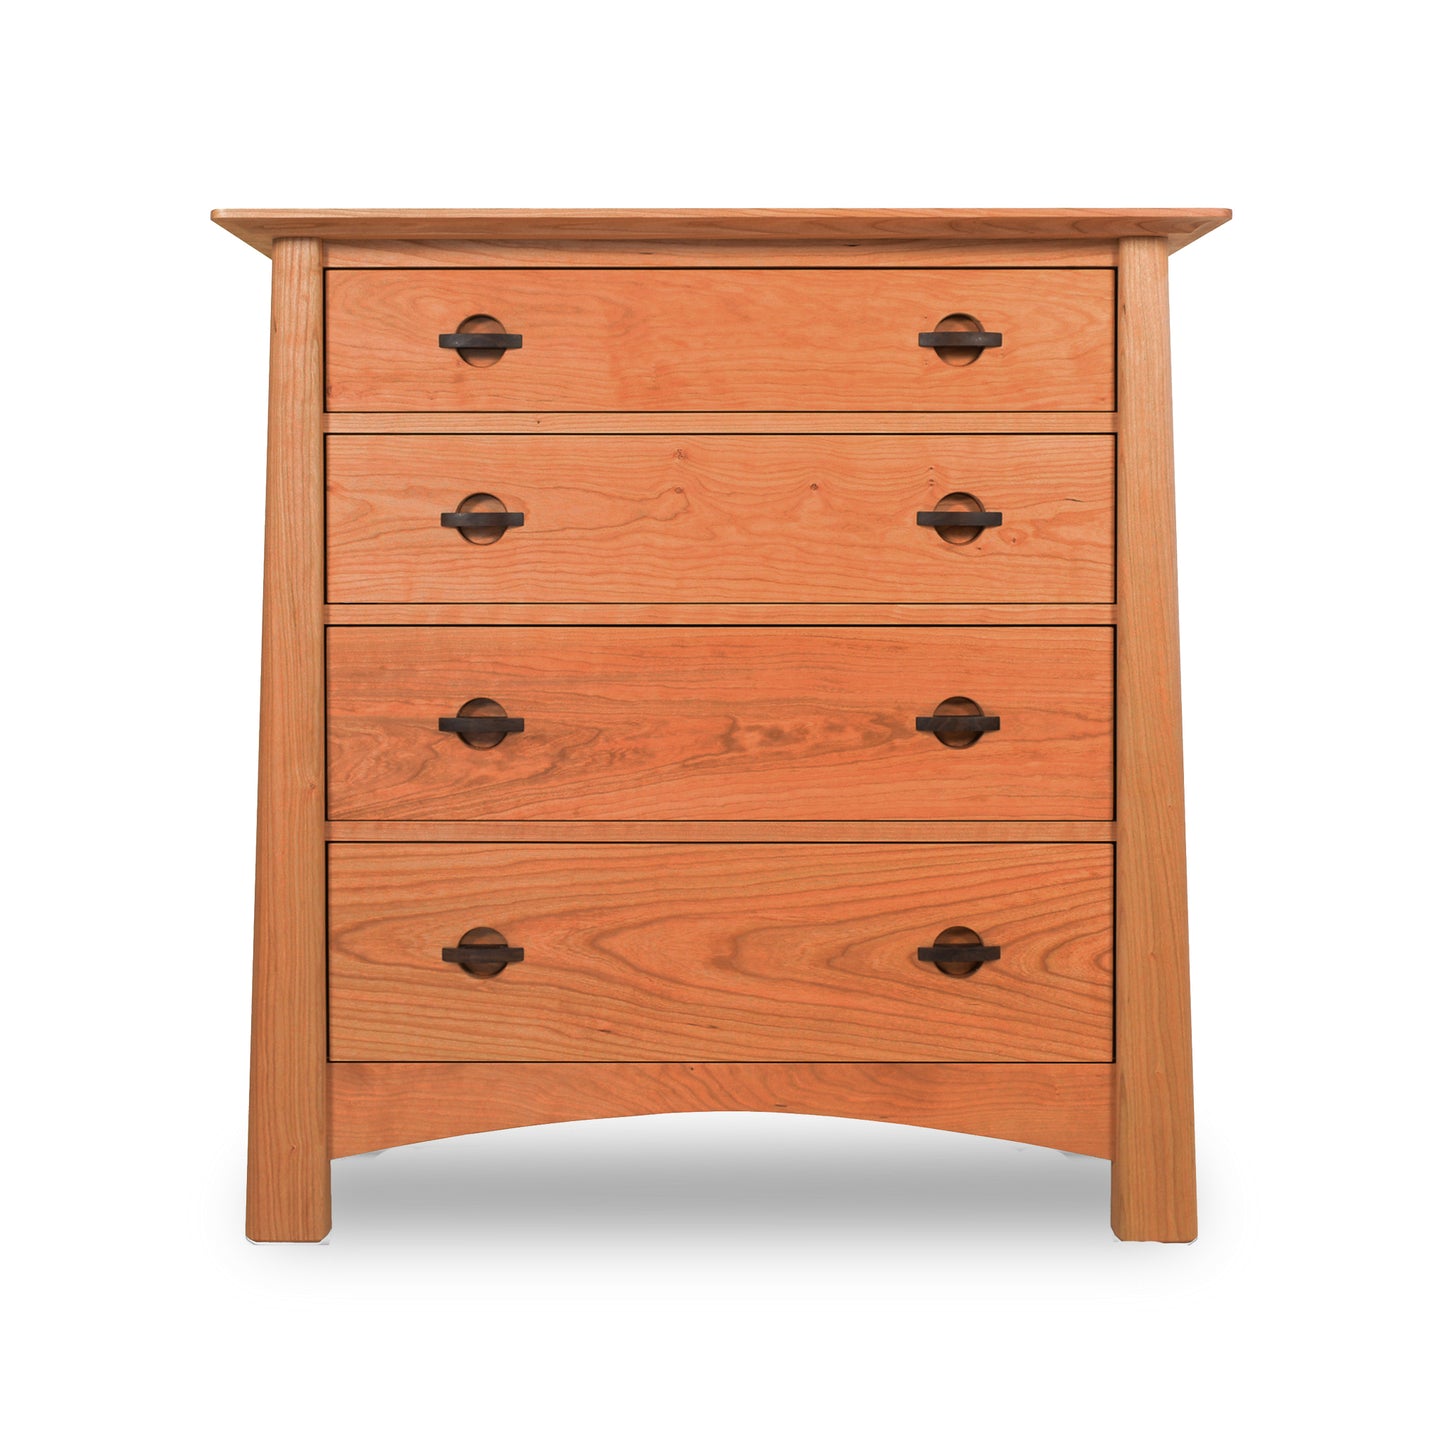 A Cherry Moon 4-Drawer Chest by Maple Corner Woodworks, with a contemporary Asian style, on a white background.